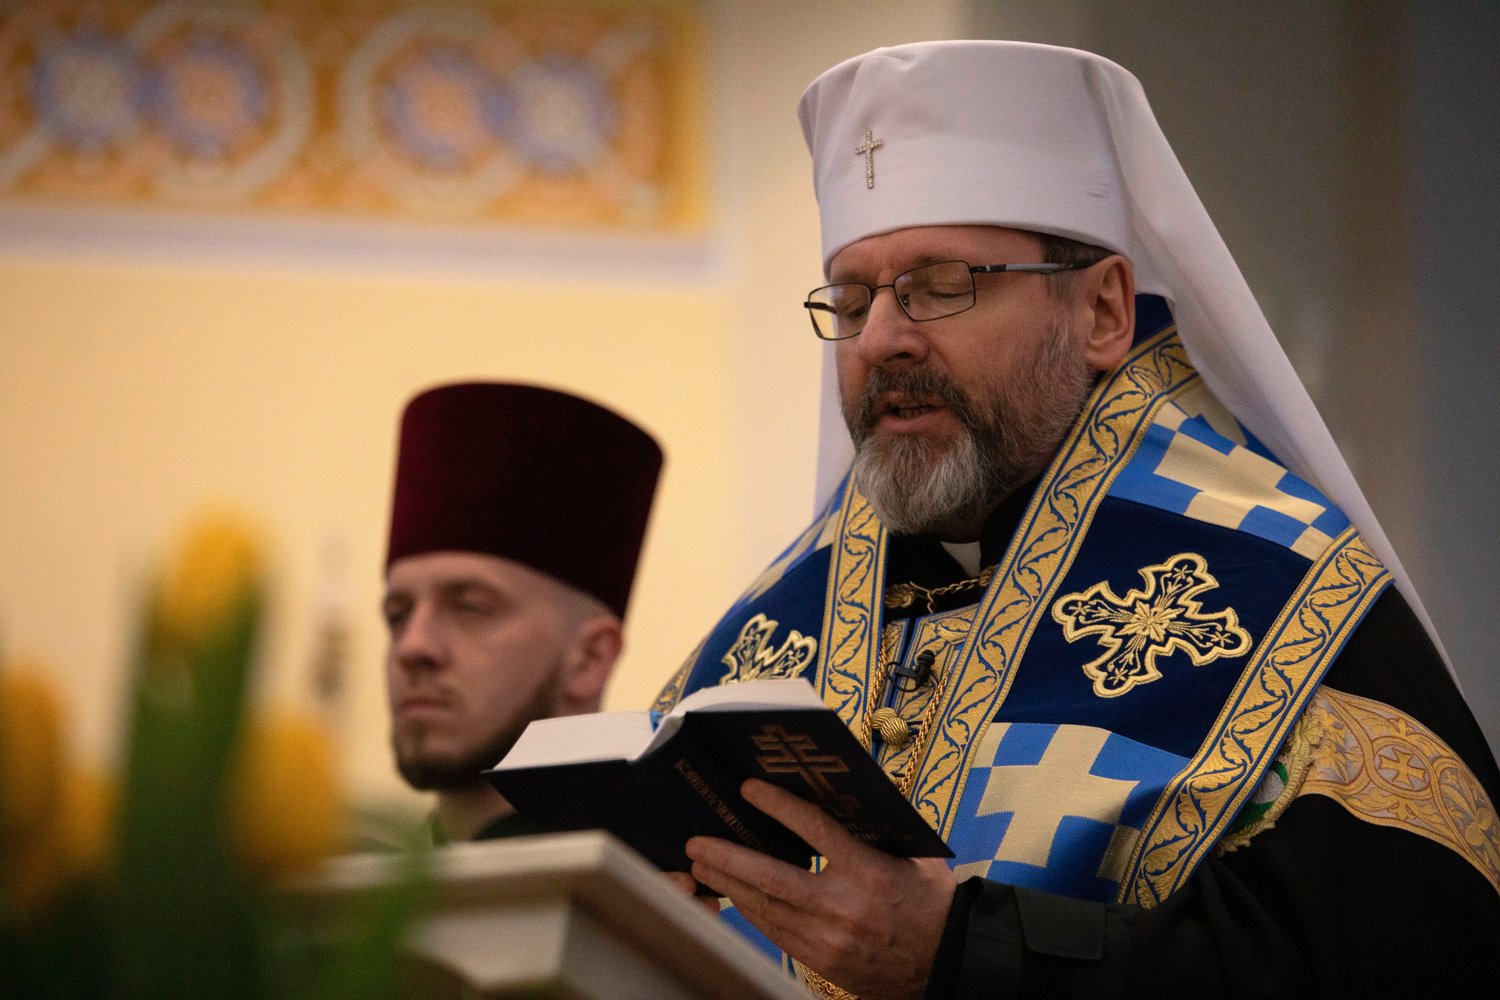 Archbishop Sviatoslav Shevchuk of Kyiv-Halych, major archbishop of the Ukrainian Catholic Church, is pictured in a March 25 photo. In a video address to members of the Pontifical Council for Promoting Christian Unity May 6, the archbishop said Russia’s reasons for attacking Ukraine are nothing more than an excuse to justify its ultimate goal of wiping out the country’s people.